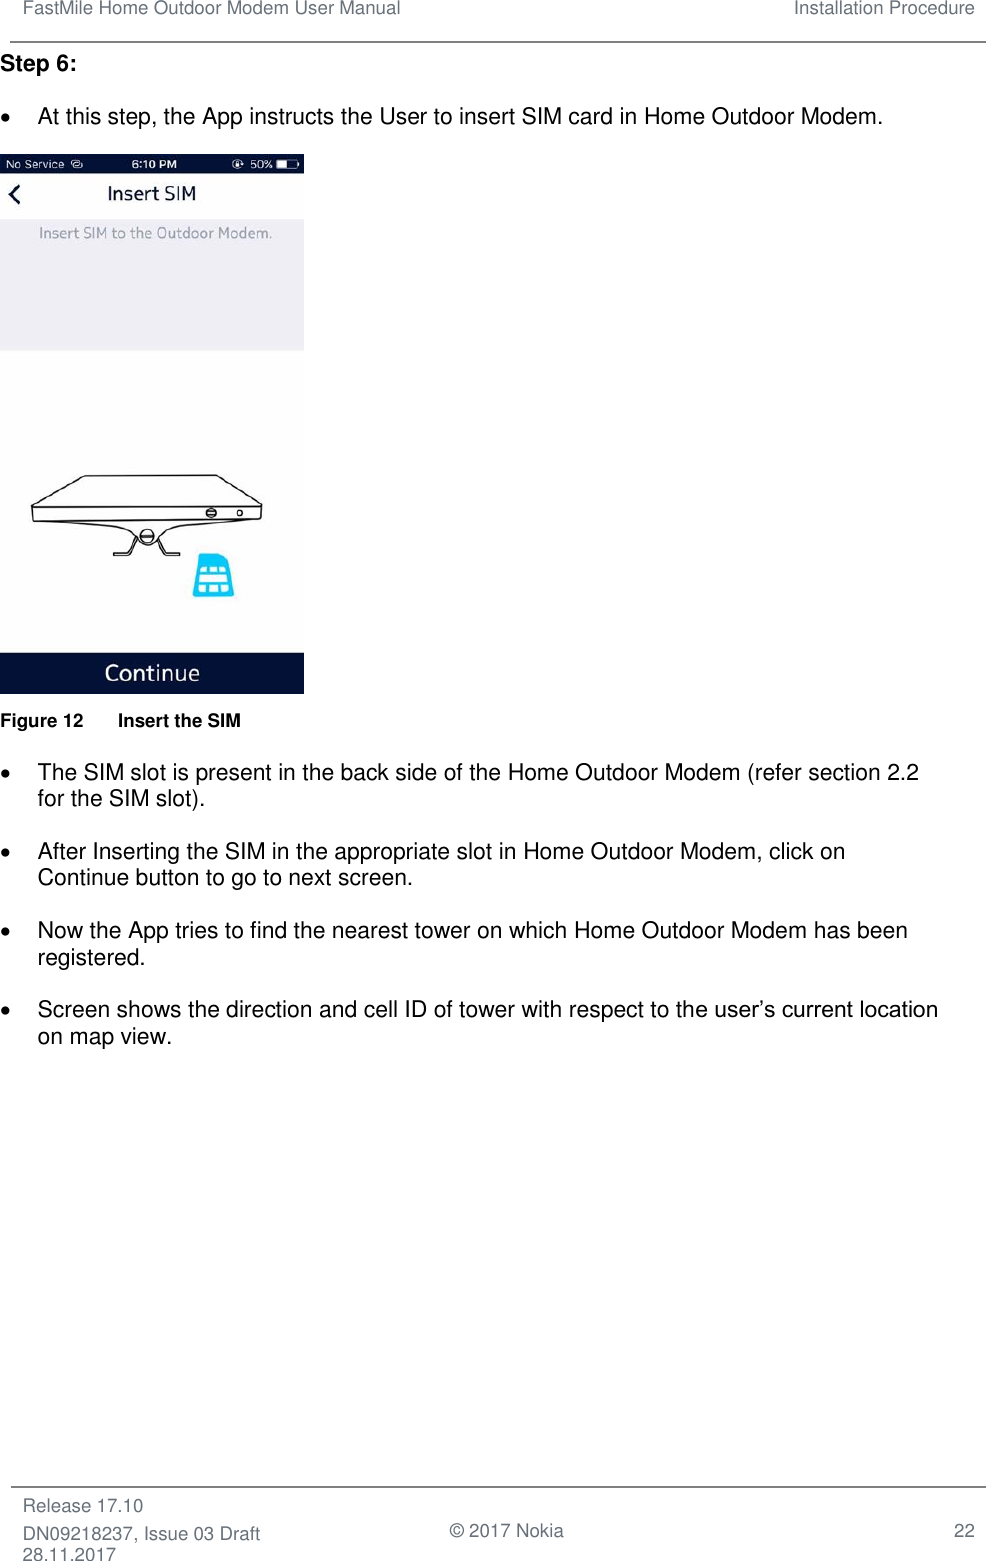 FastMile Home Outdoor Modem User Manual Installation Procedure  Release 17.10 DN09218237, Issue 03 Draft 28.11.2017                                © 2017 Nokia 22  Step 6: •  At this step, the App instructs the User to insert SIM card in Home Outdoor Modem.    Figure 12  Insert the SIM •  The SIM slot is present in the back side of the Home Outdoor Modem (refer section 2.2 for the SIM slot). •  After Inserting the SIM in the appropriate slot in Home Outdoor Modem, click on Continue button to go to next screen.  •  Now the App tries to find the nearest tower on which Home Outdoor Modem has been registered. •  Screen shows the direction and cell ID of tower with respect to the user’s current location on map view. 